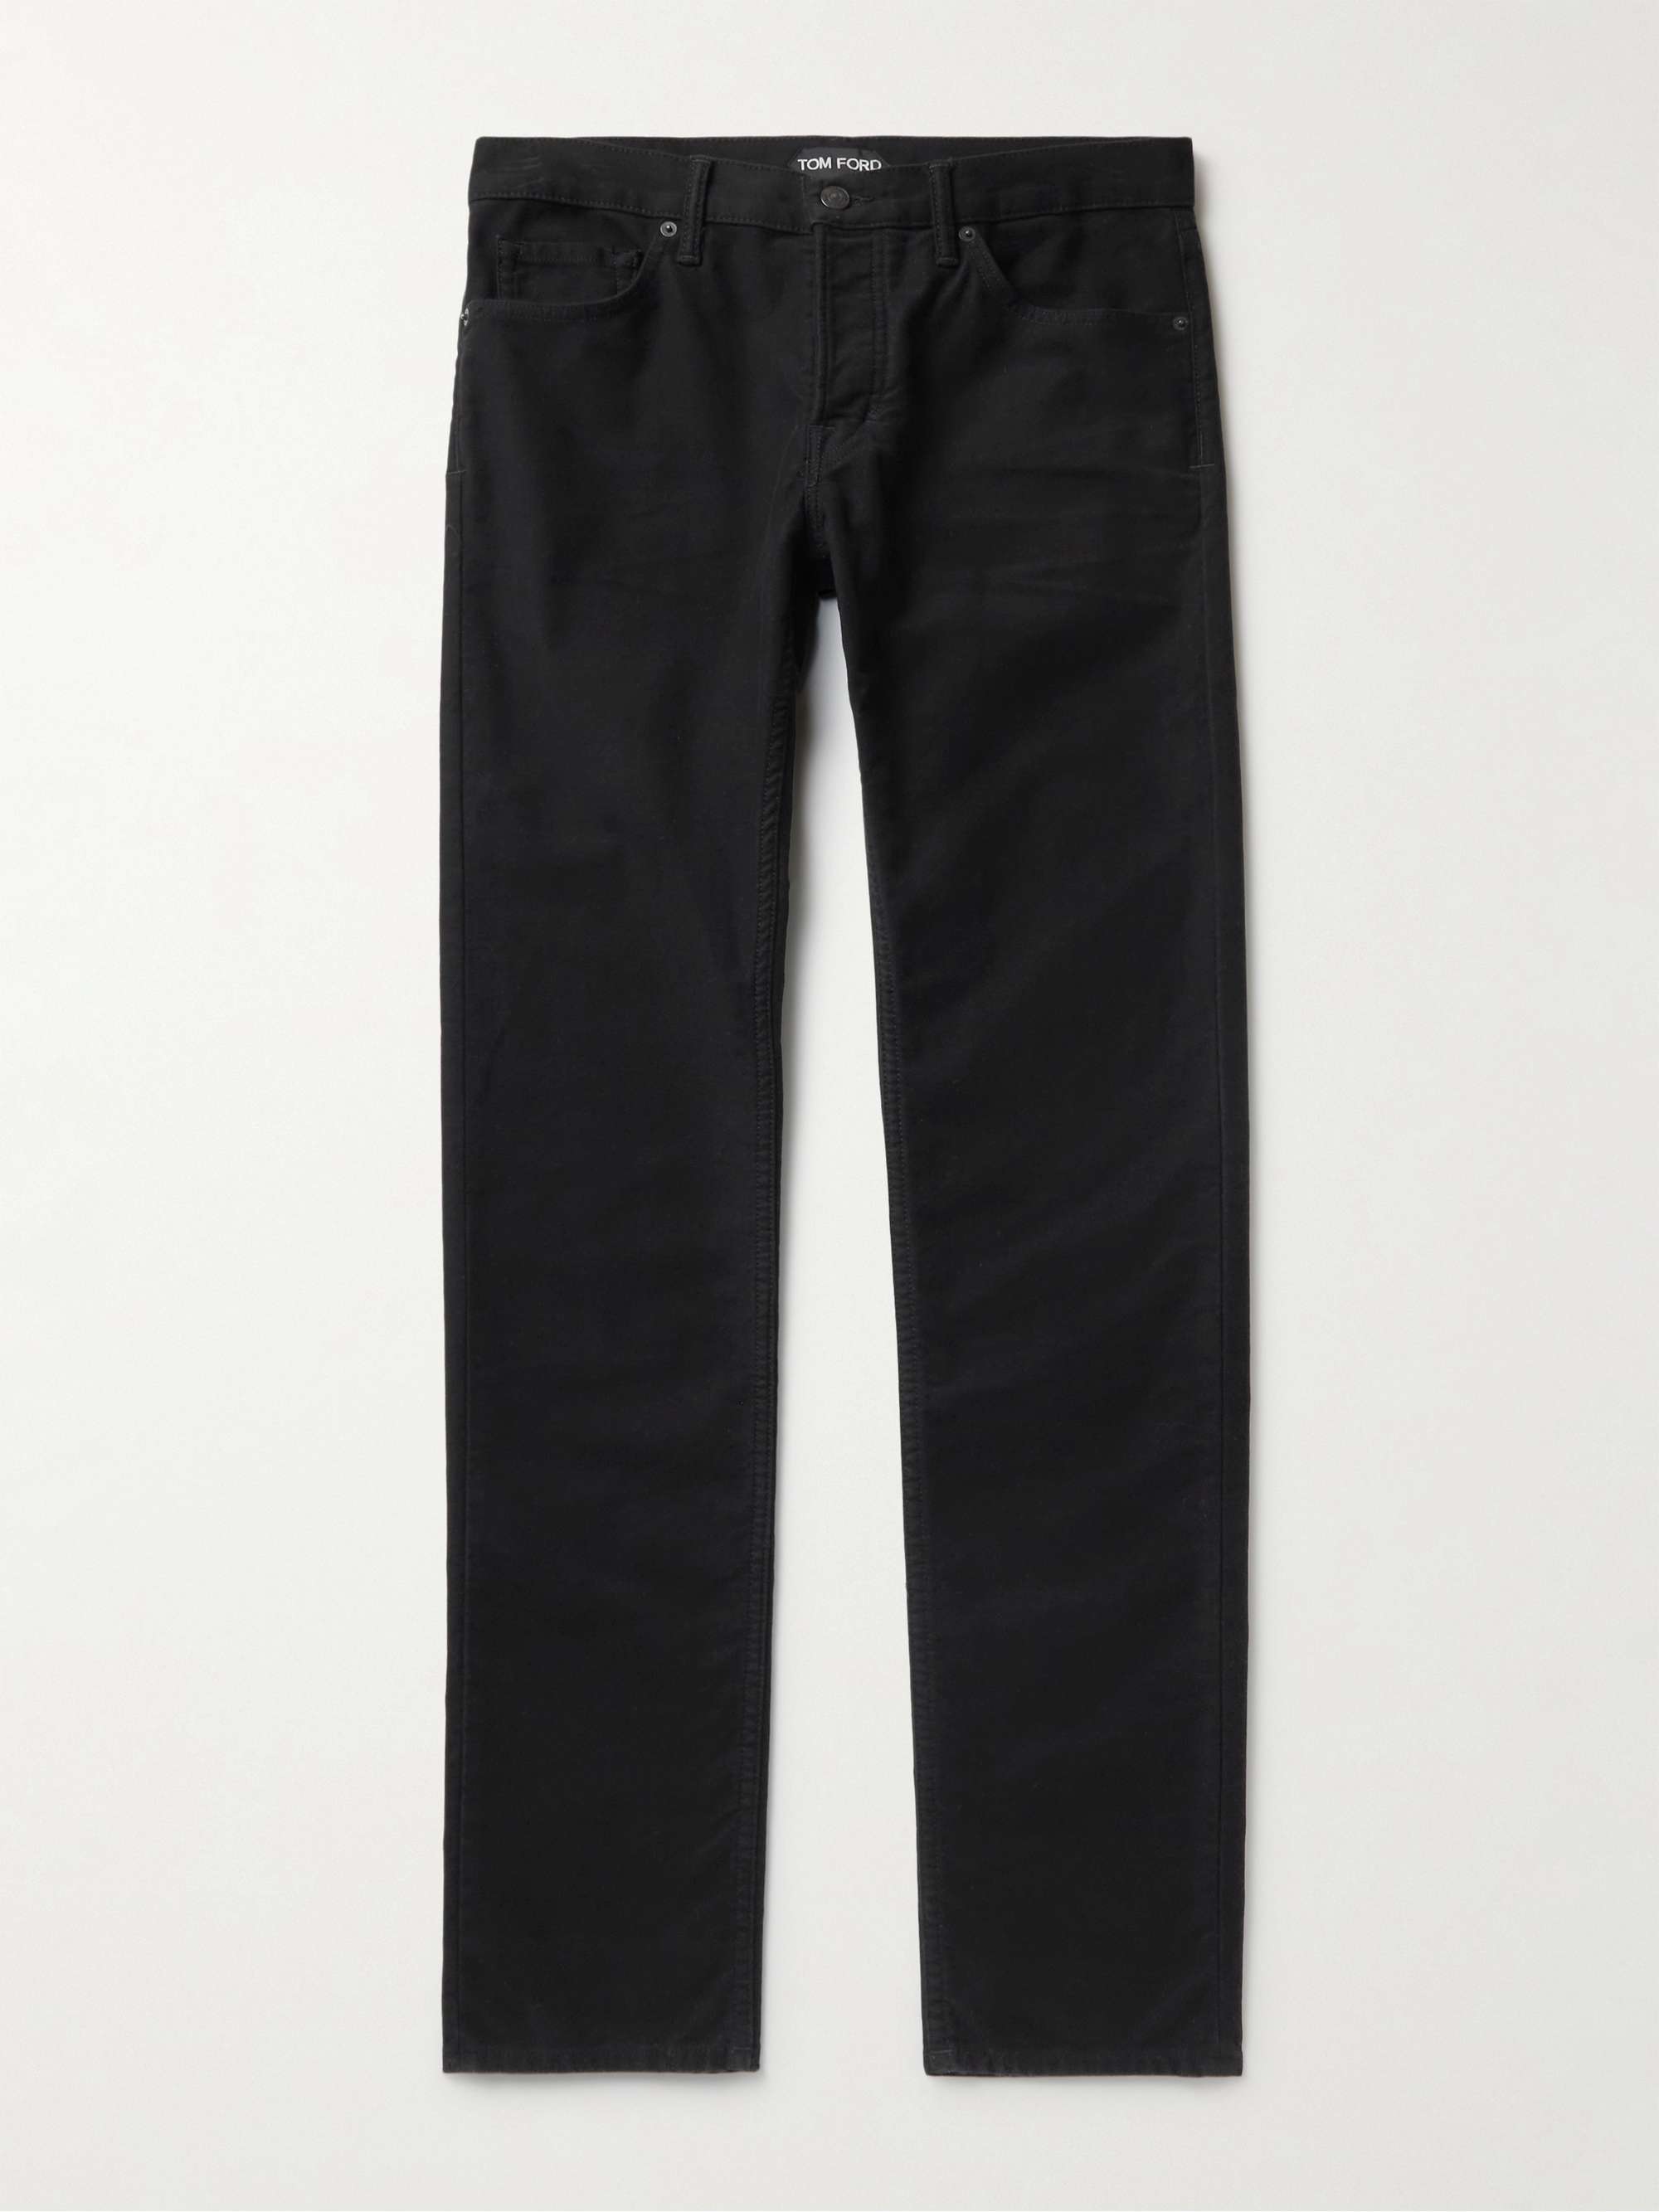 TOM FORD Slim-Fit Stretch-Cotton Moleskin Trousers